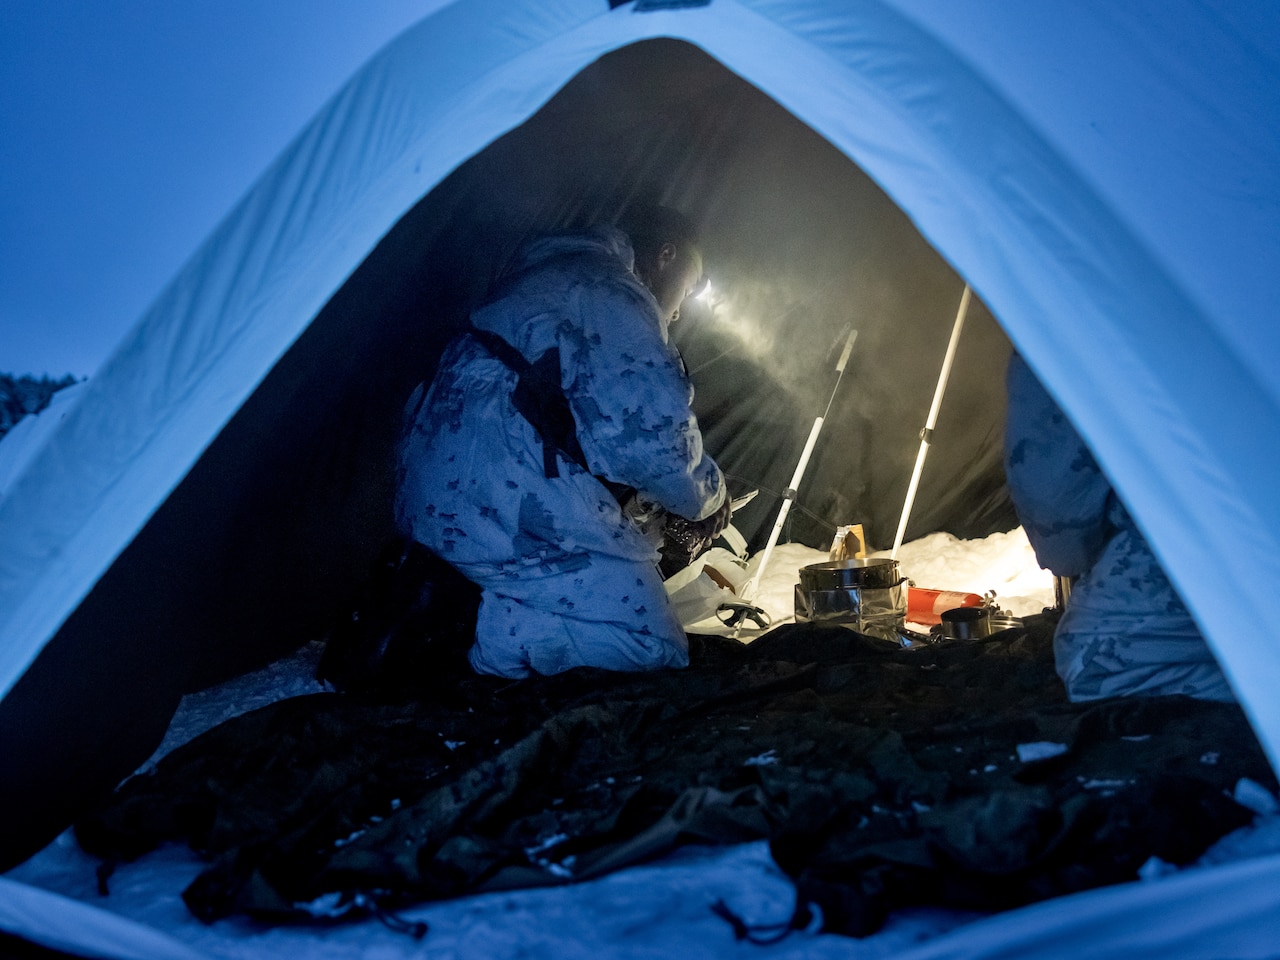 A Marine boils water in a tent.